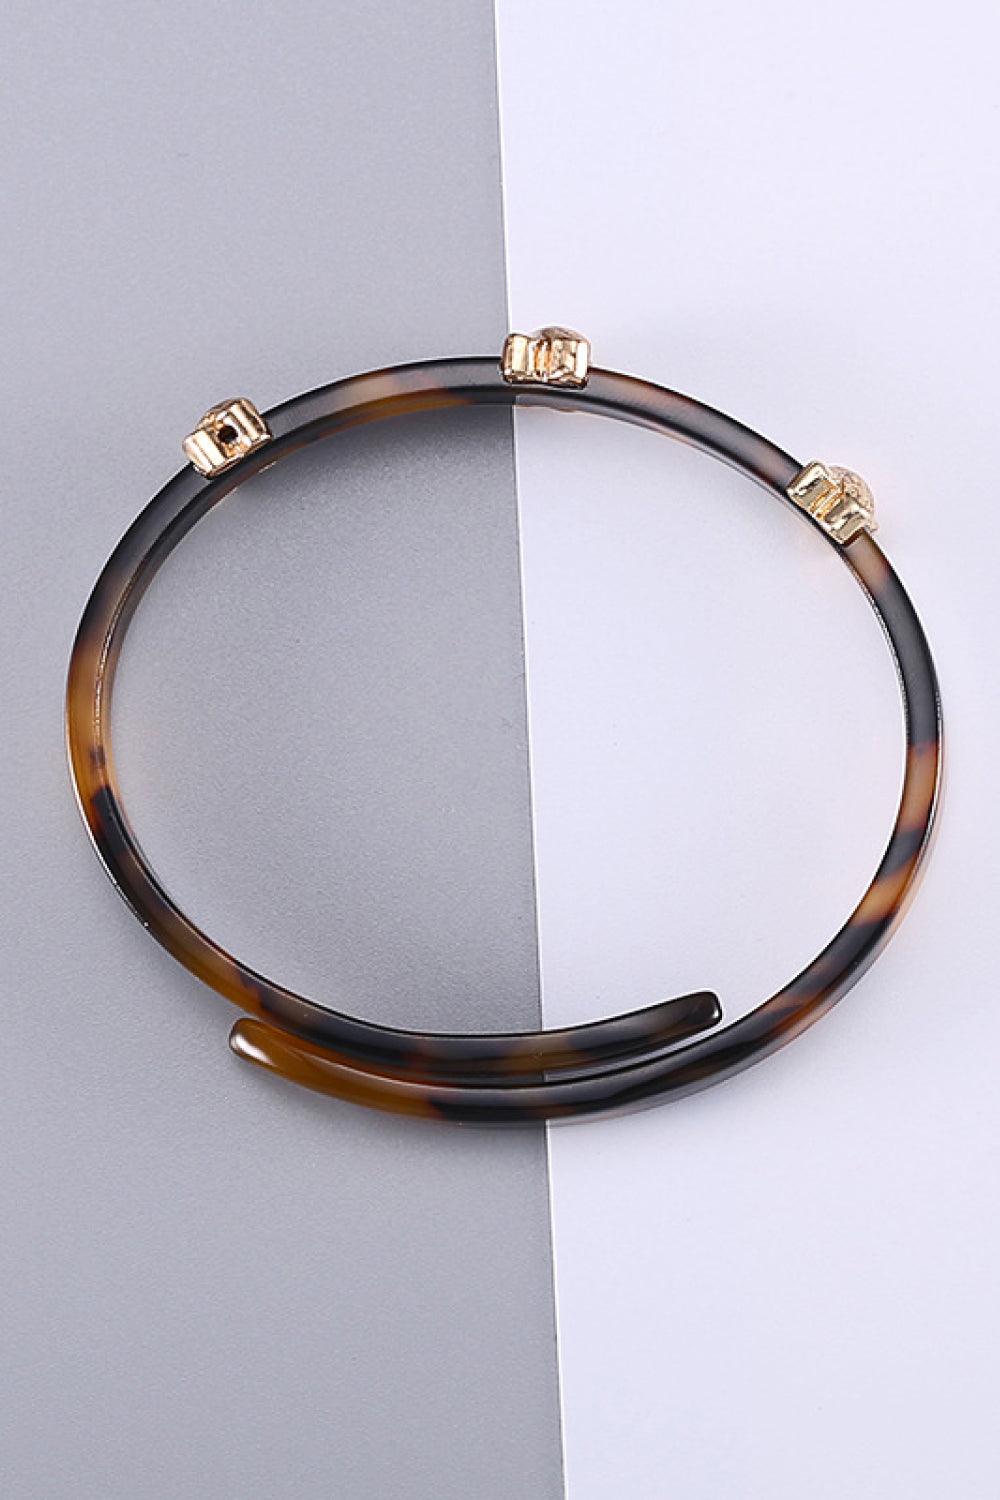 Complete Your Look with a Stylish Faux Tortoise Shell Bypass Bracelet